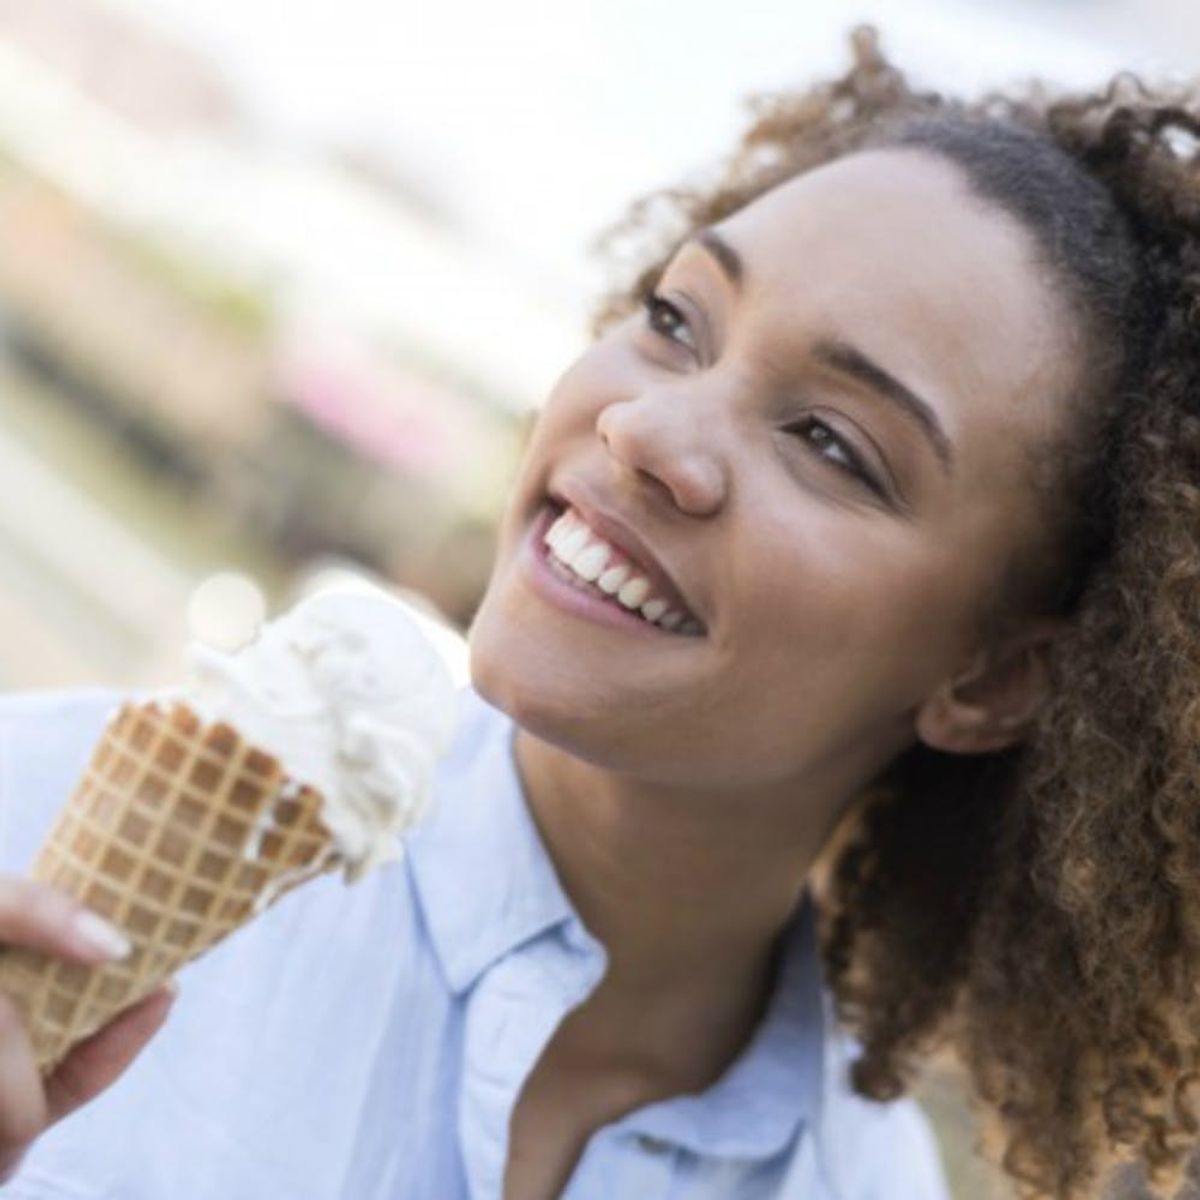 Hold Up: There Will Soon Be a Museum Dedicated Entirely to Ice Cream